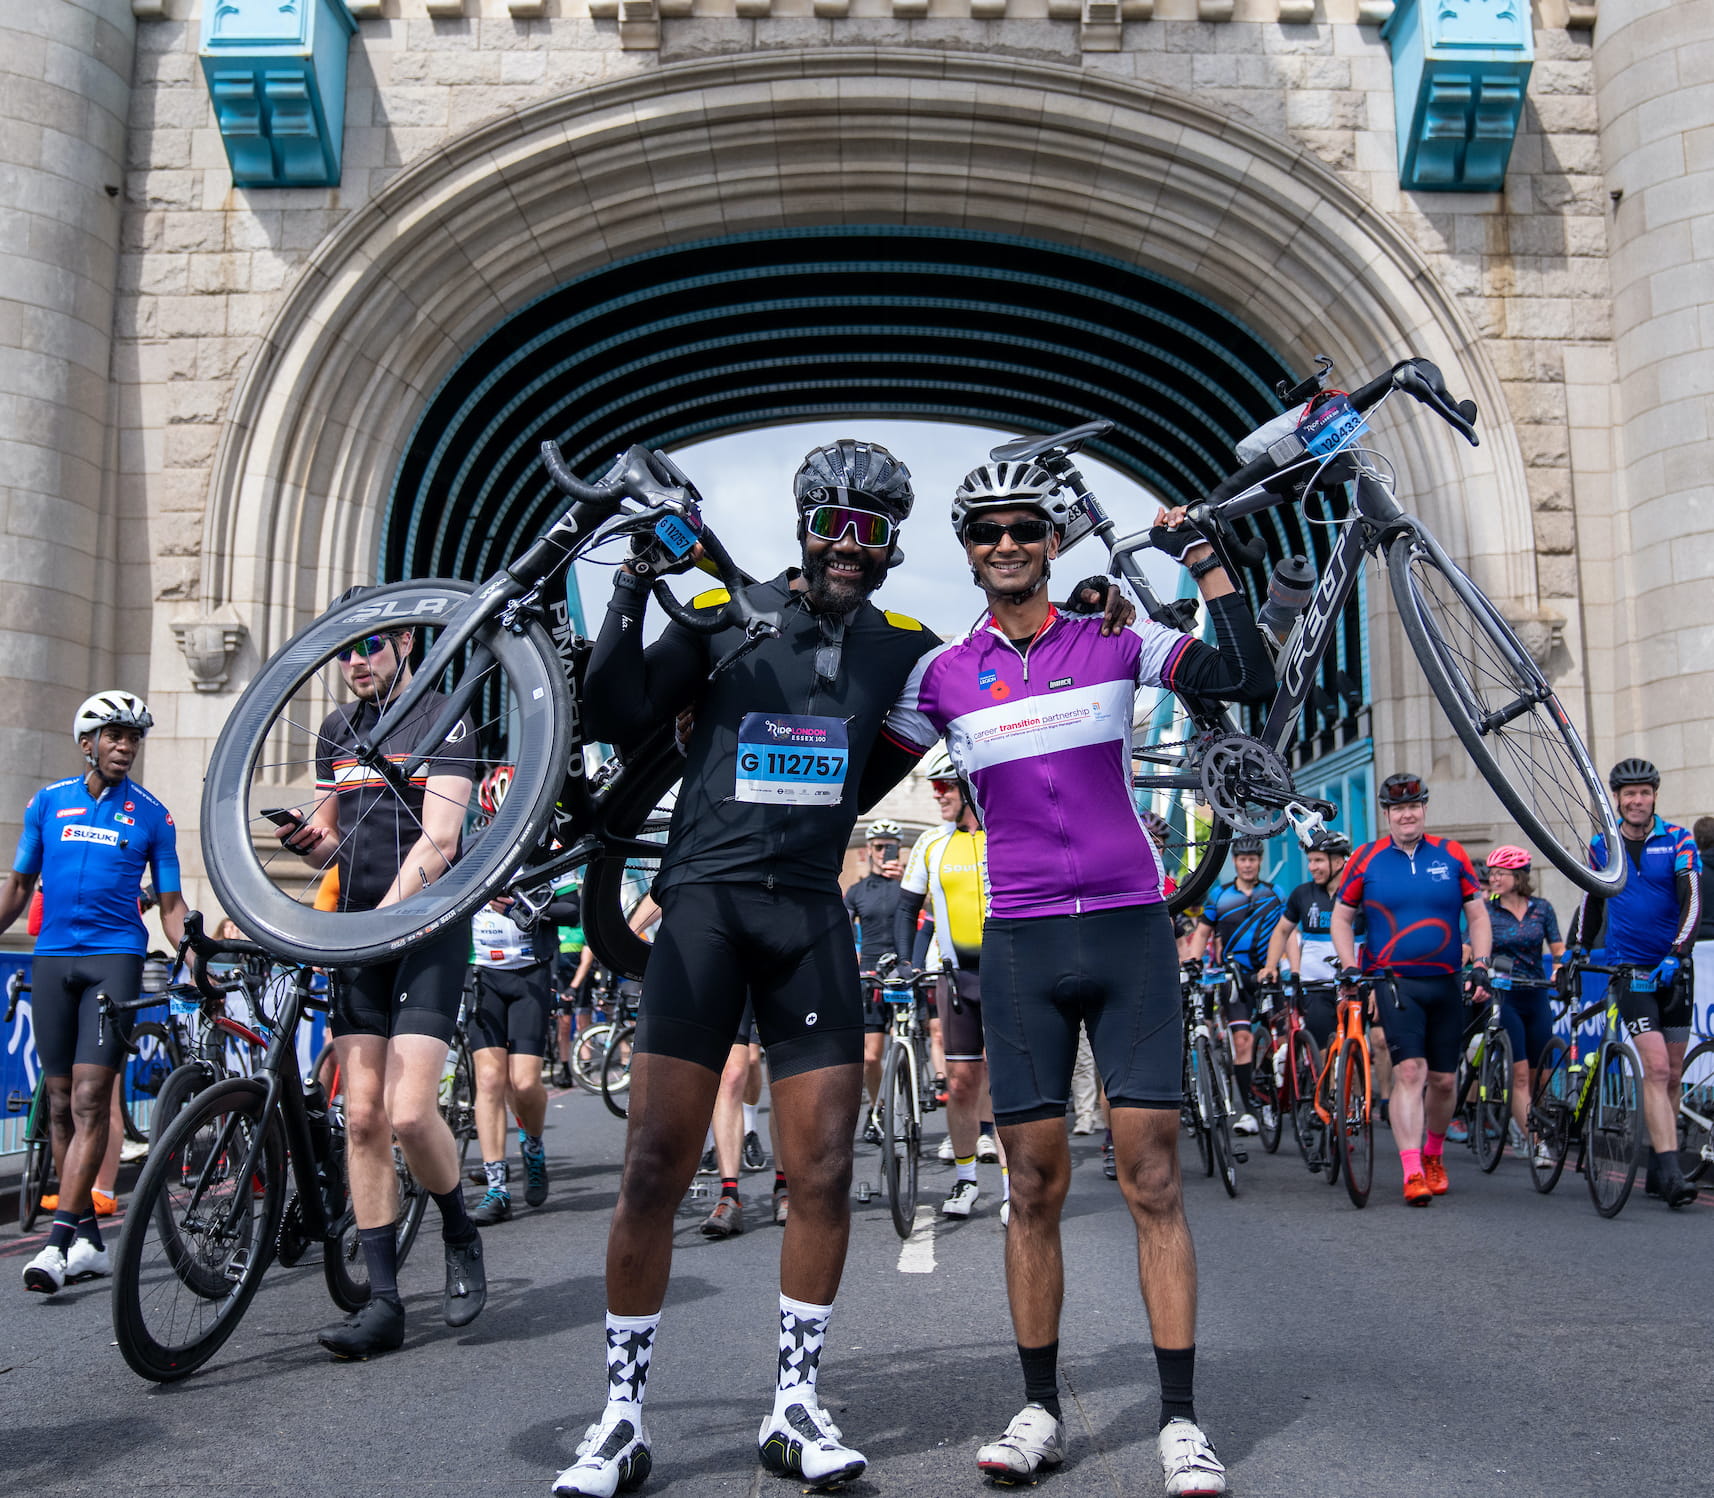 Riders lift their bikes after completing the RideLondon-Essex sportive